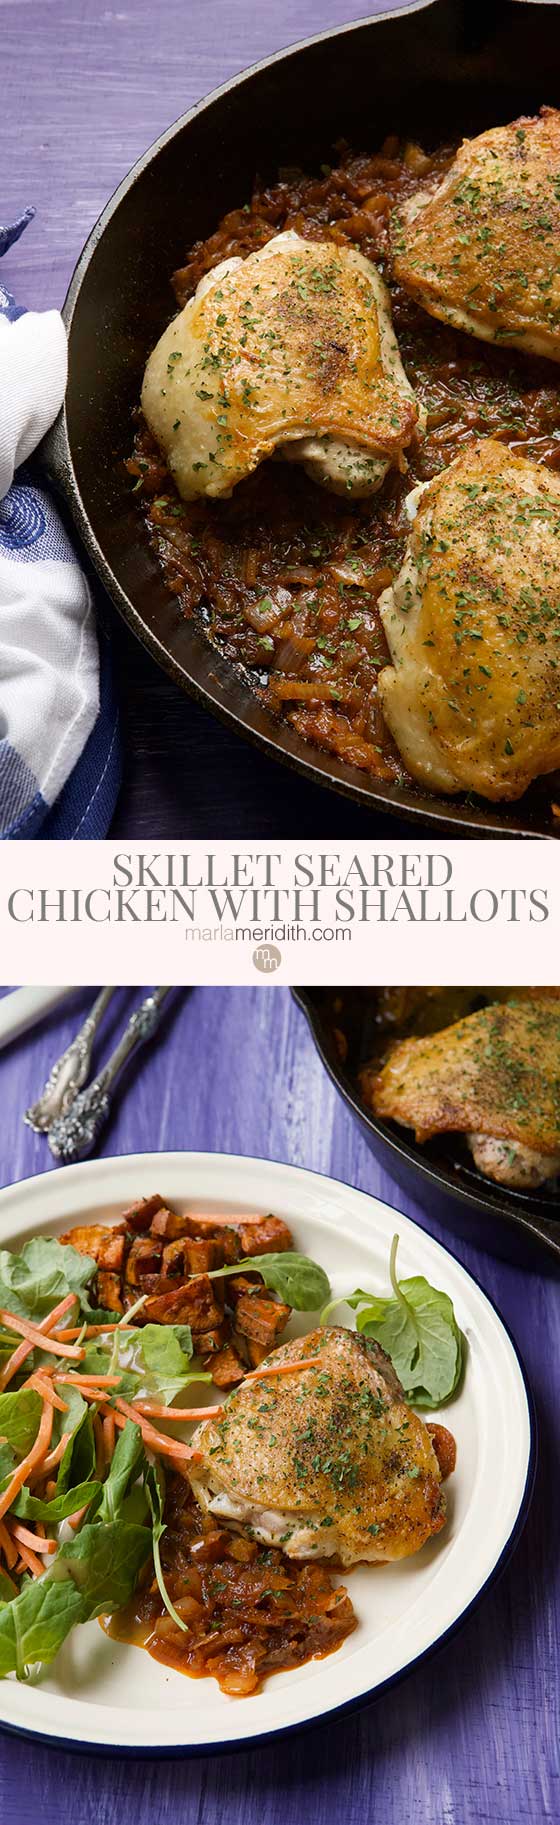 A favorite family recipe! Try this quick and easy Skillet Seared Chicken with Shallots recipe for weeknight meals or date night. MarlaMeridith.com